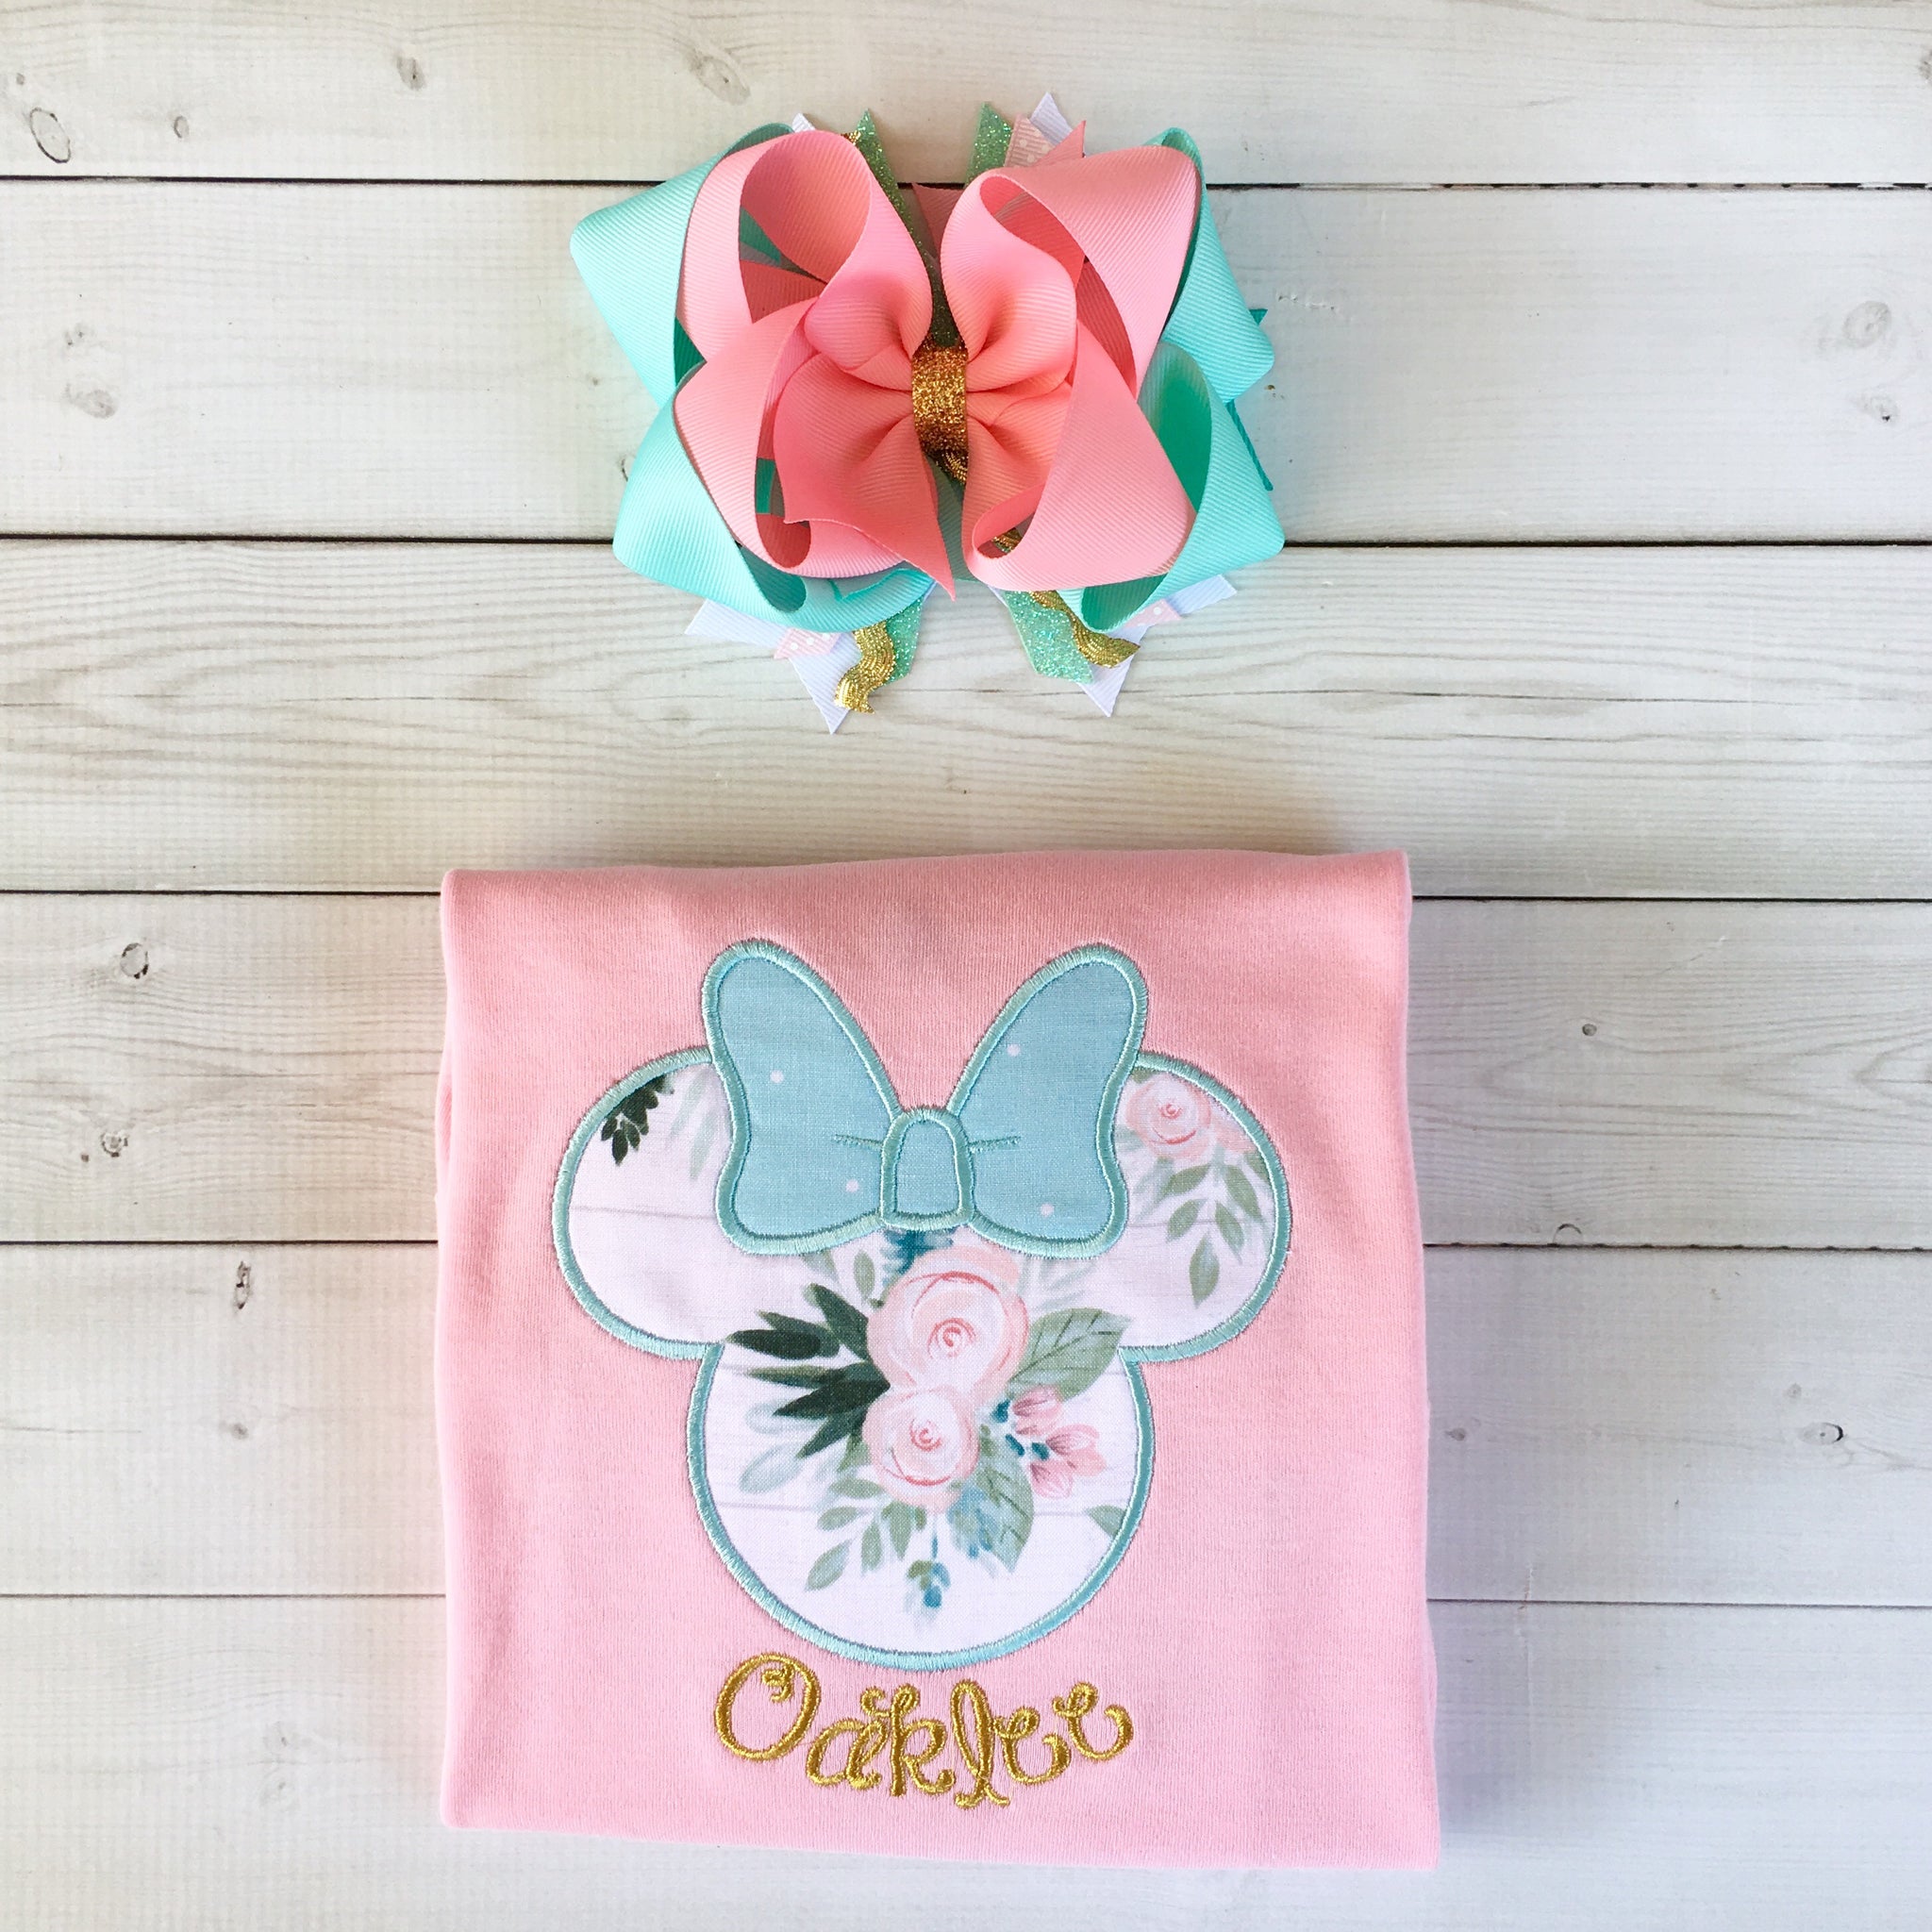 Gorgeous Disney shirts for girls, toddlers and babies. Minnie-like silhouette done in pretty floral fabric and aqua dot bow. Perfect family shirt design!